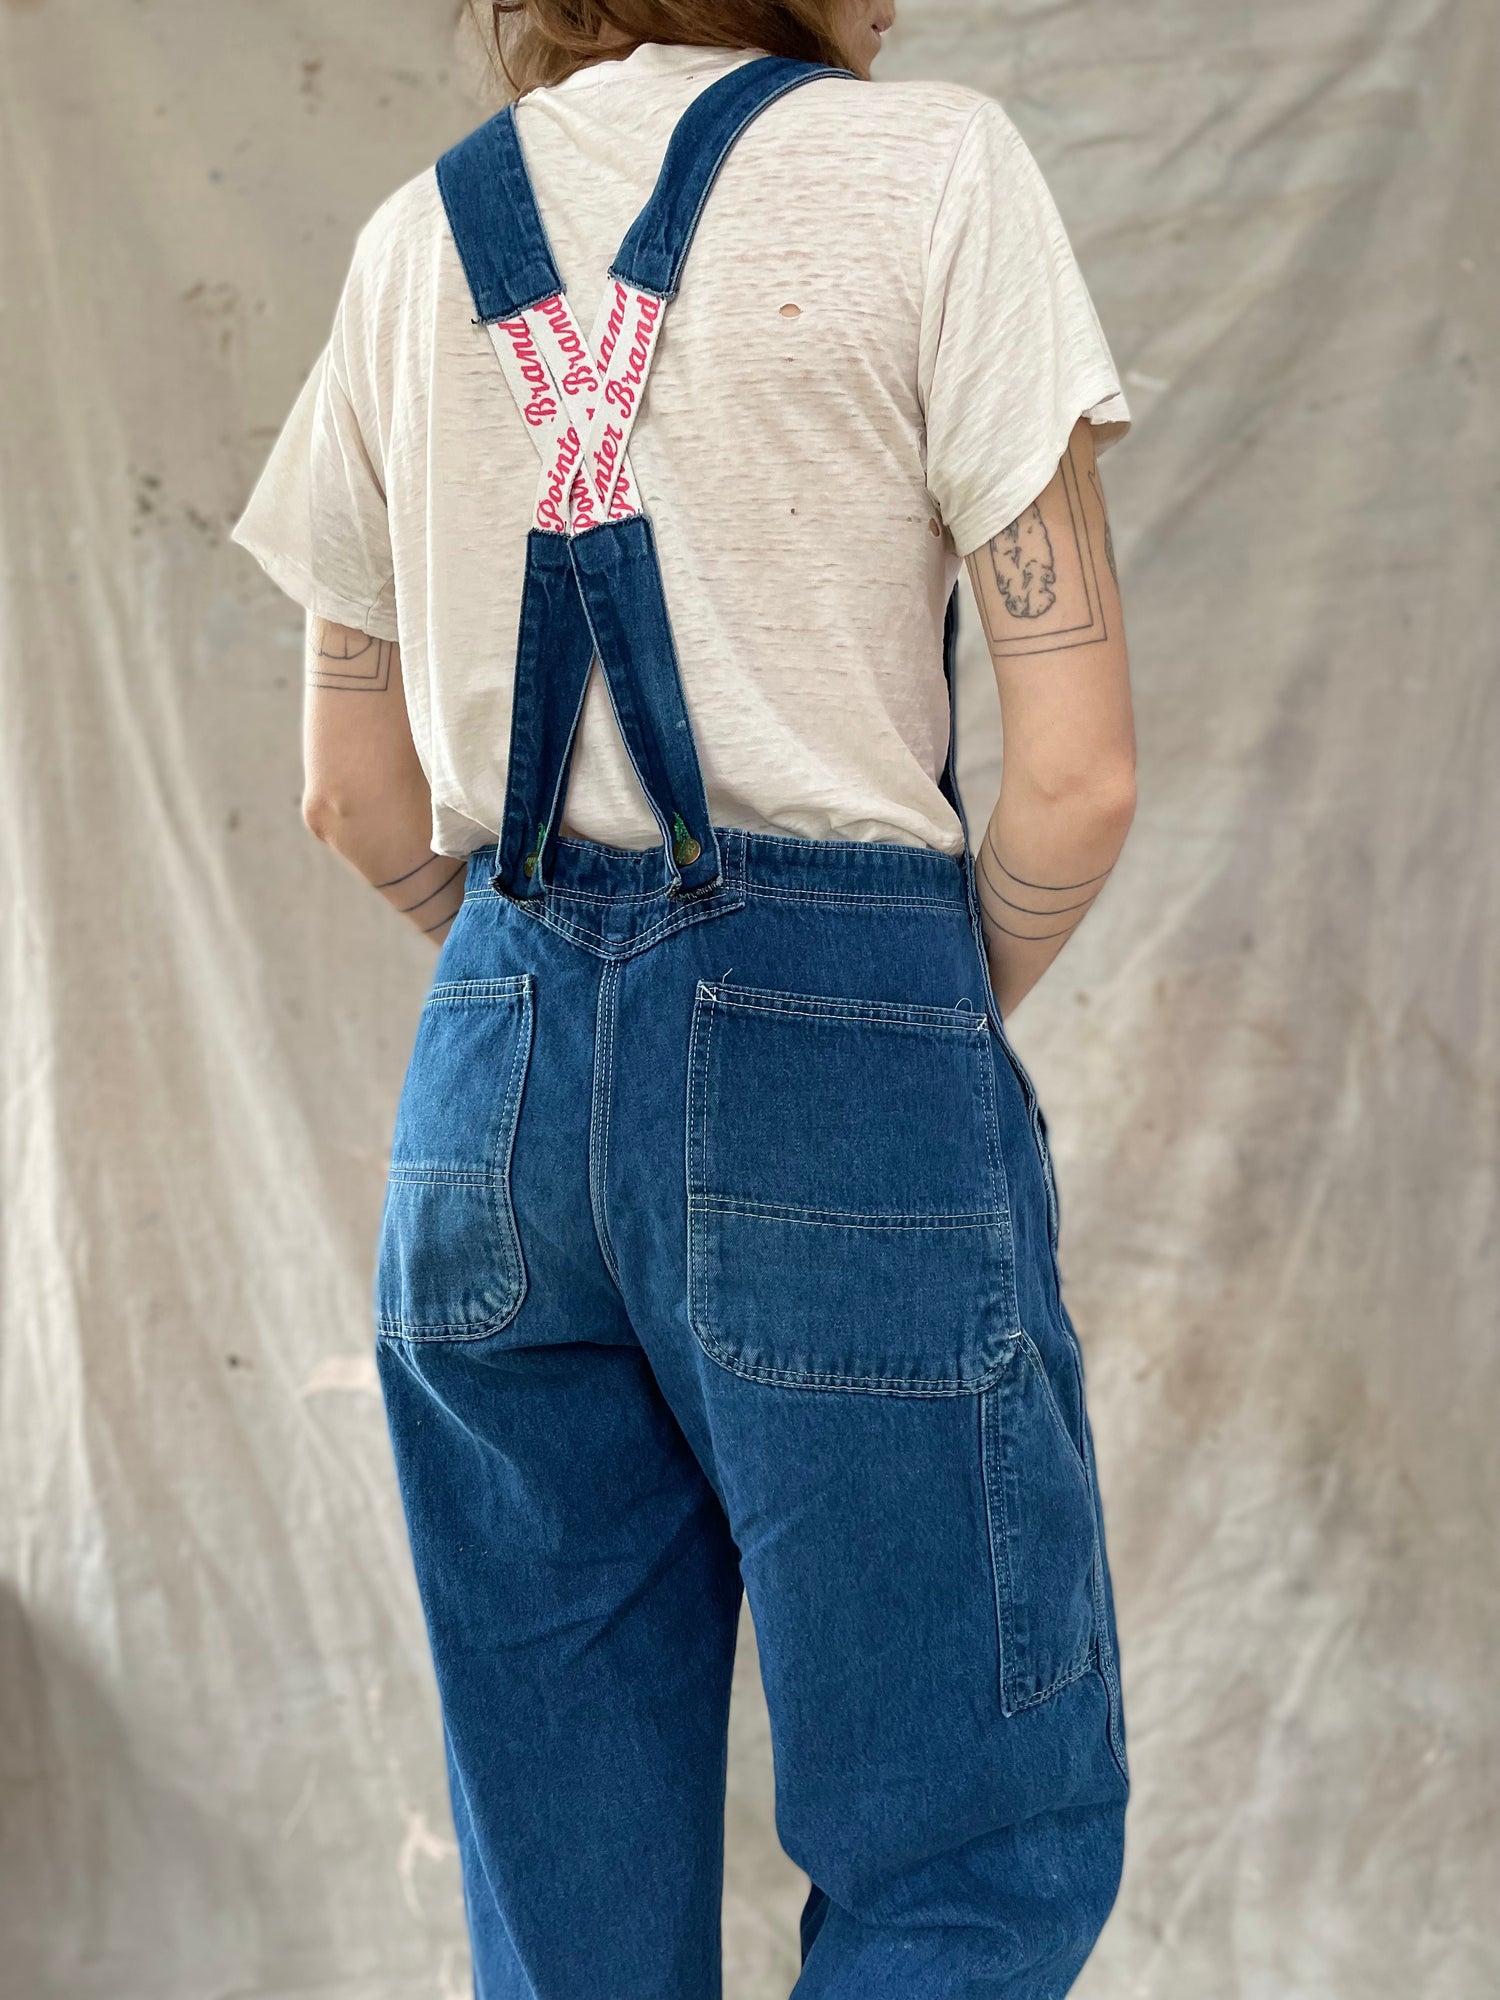 Overalls Back View